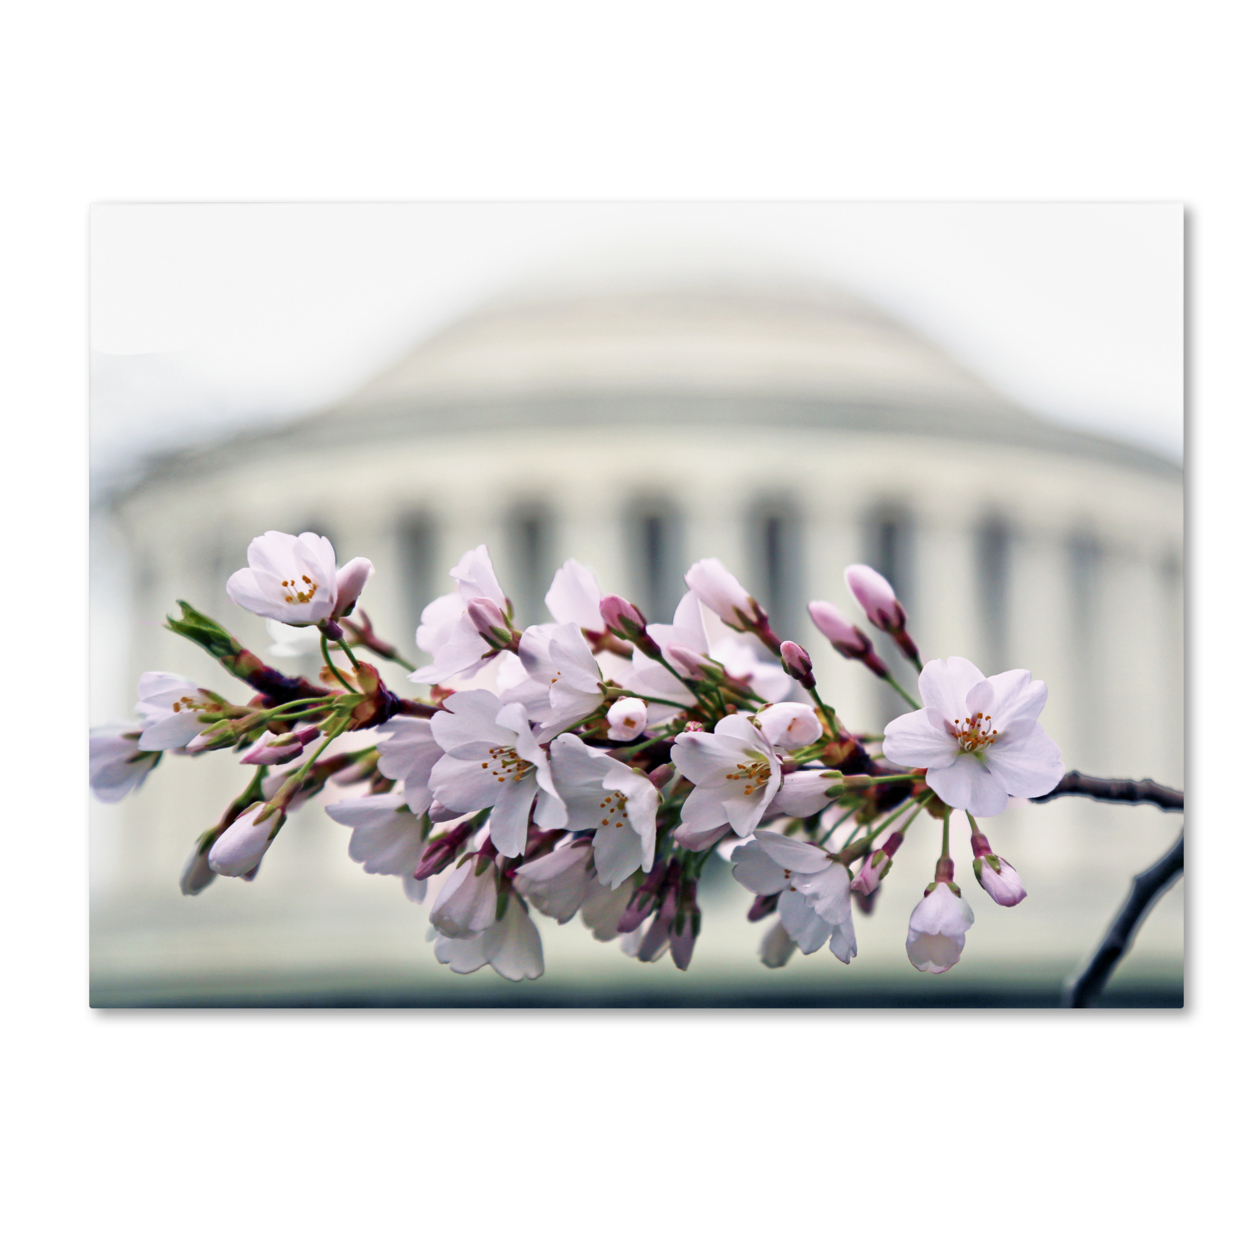 CATeyes 'Jefferson Memorial Blossoms' Canvas Wall Art 35 X 47 Inches